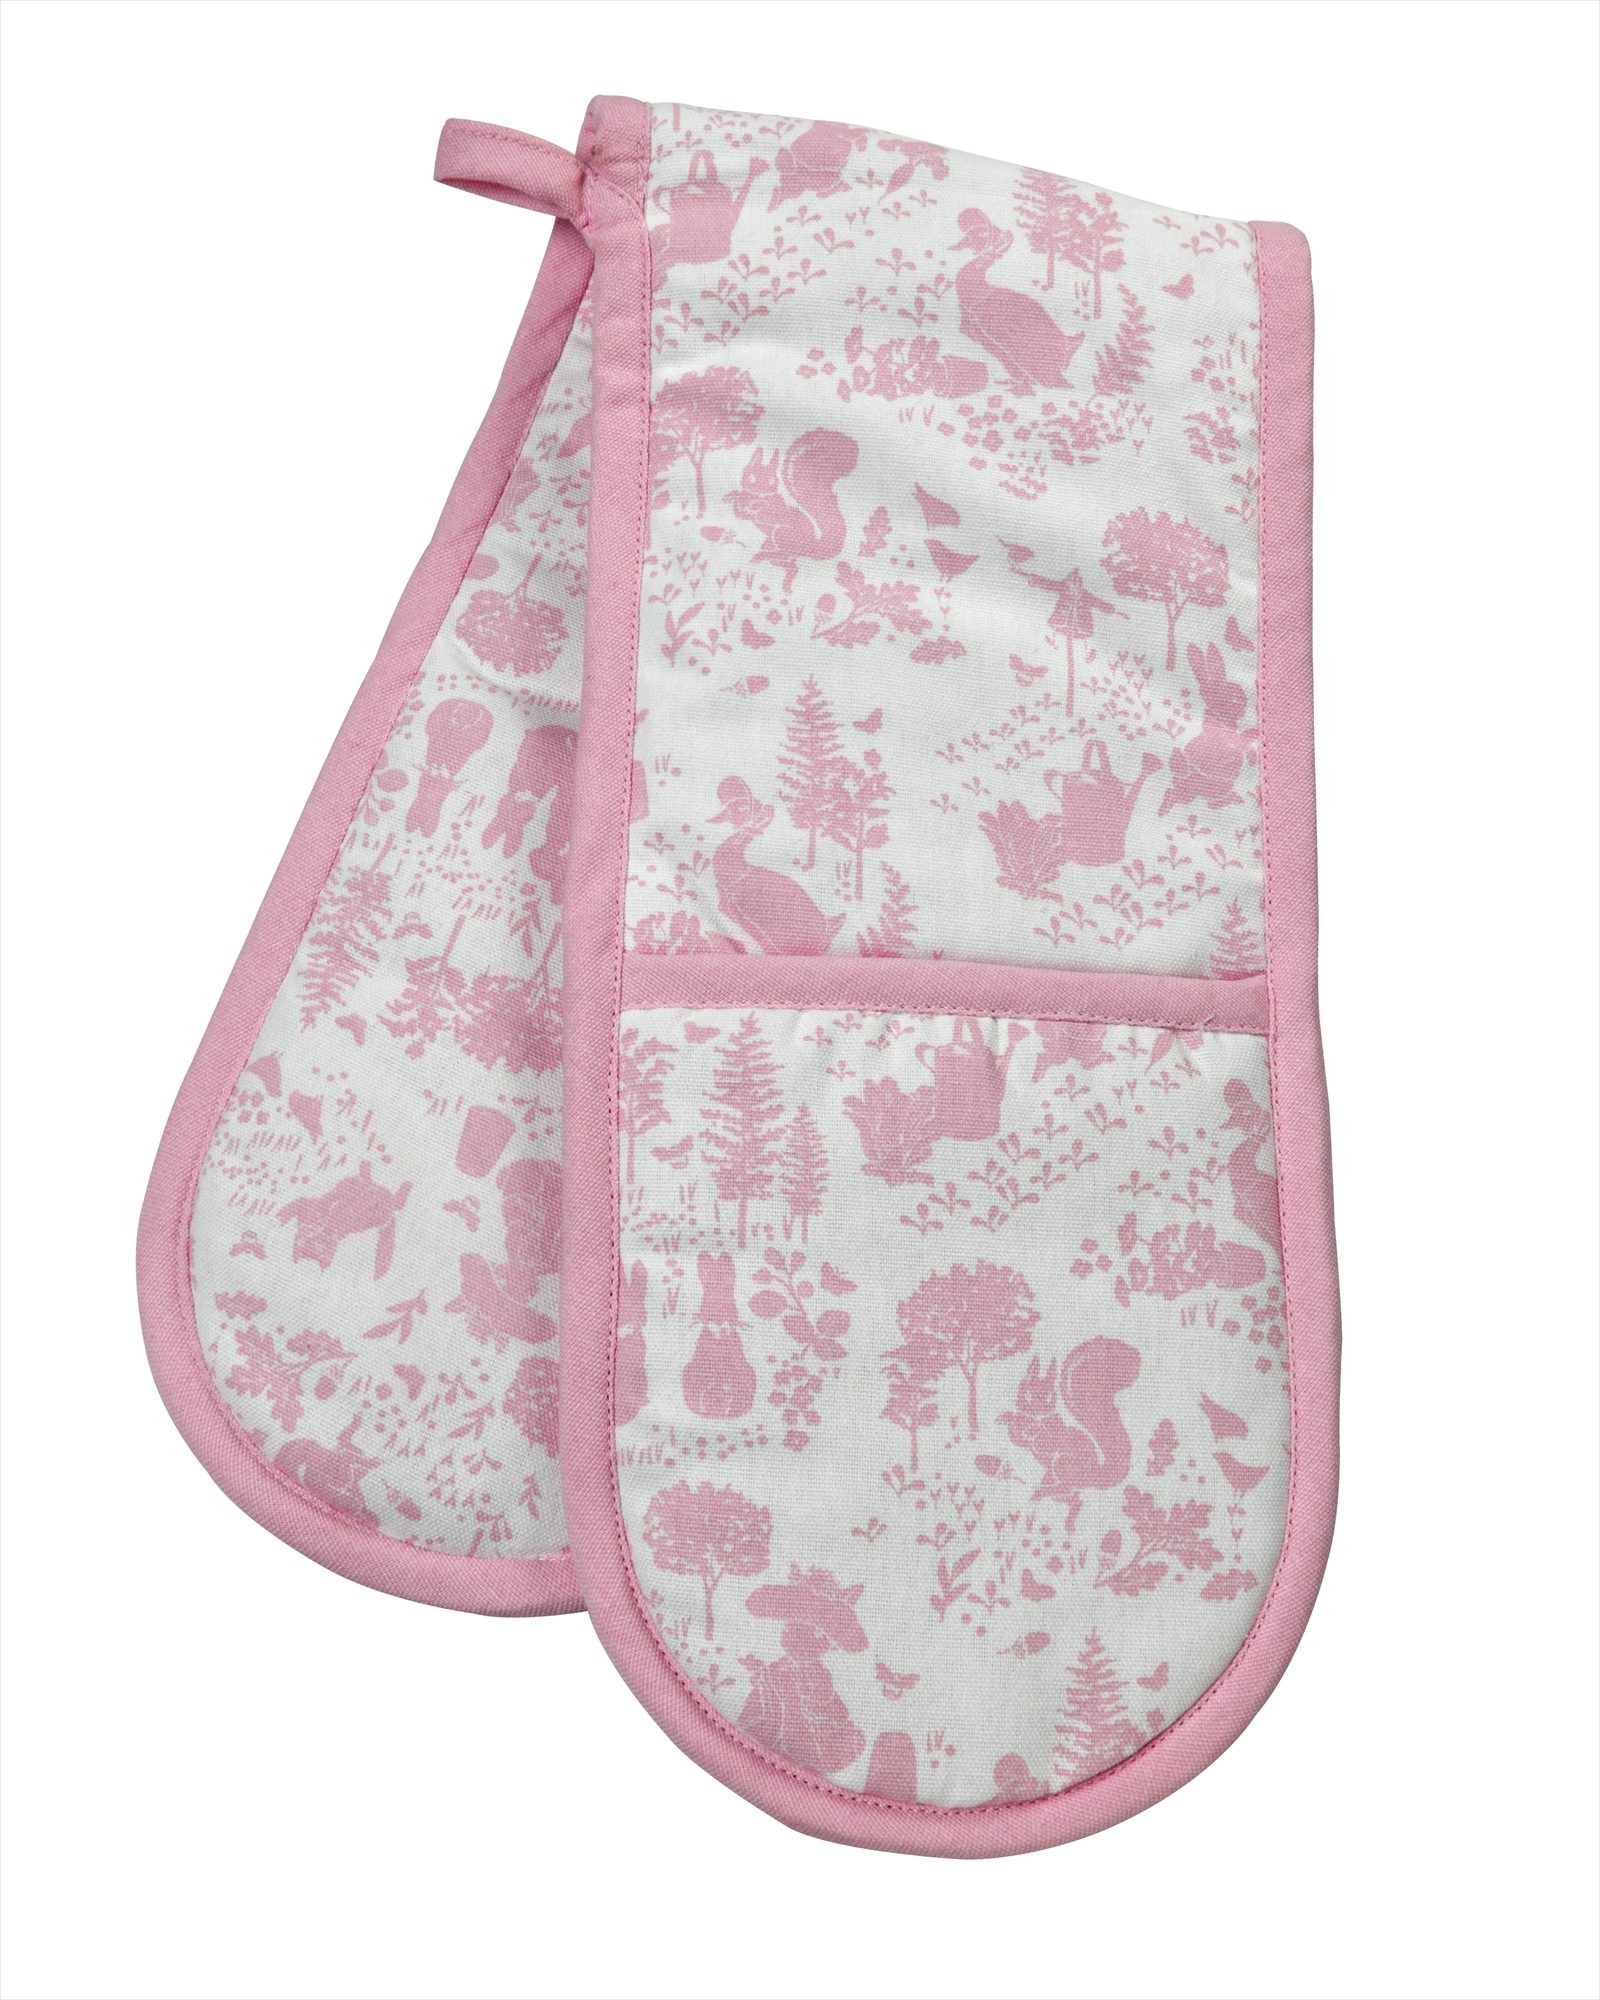 PETER RABBIT CLASSIC PATTERN PINK DOUBLE OVEN GLOVE